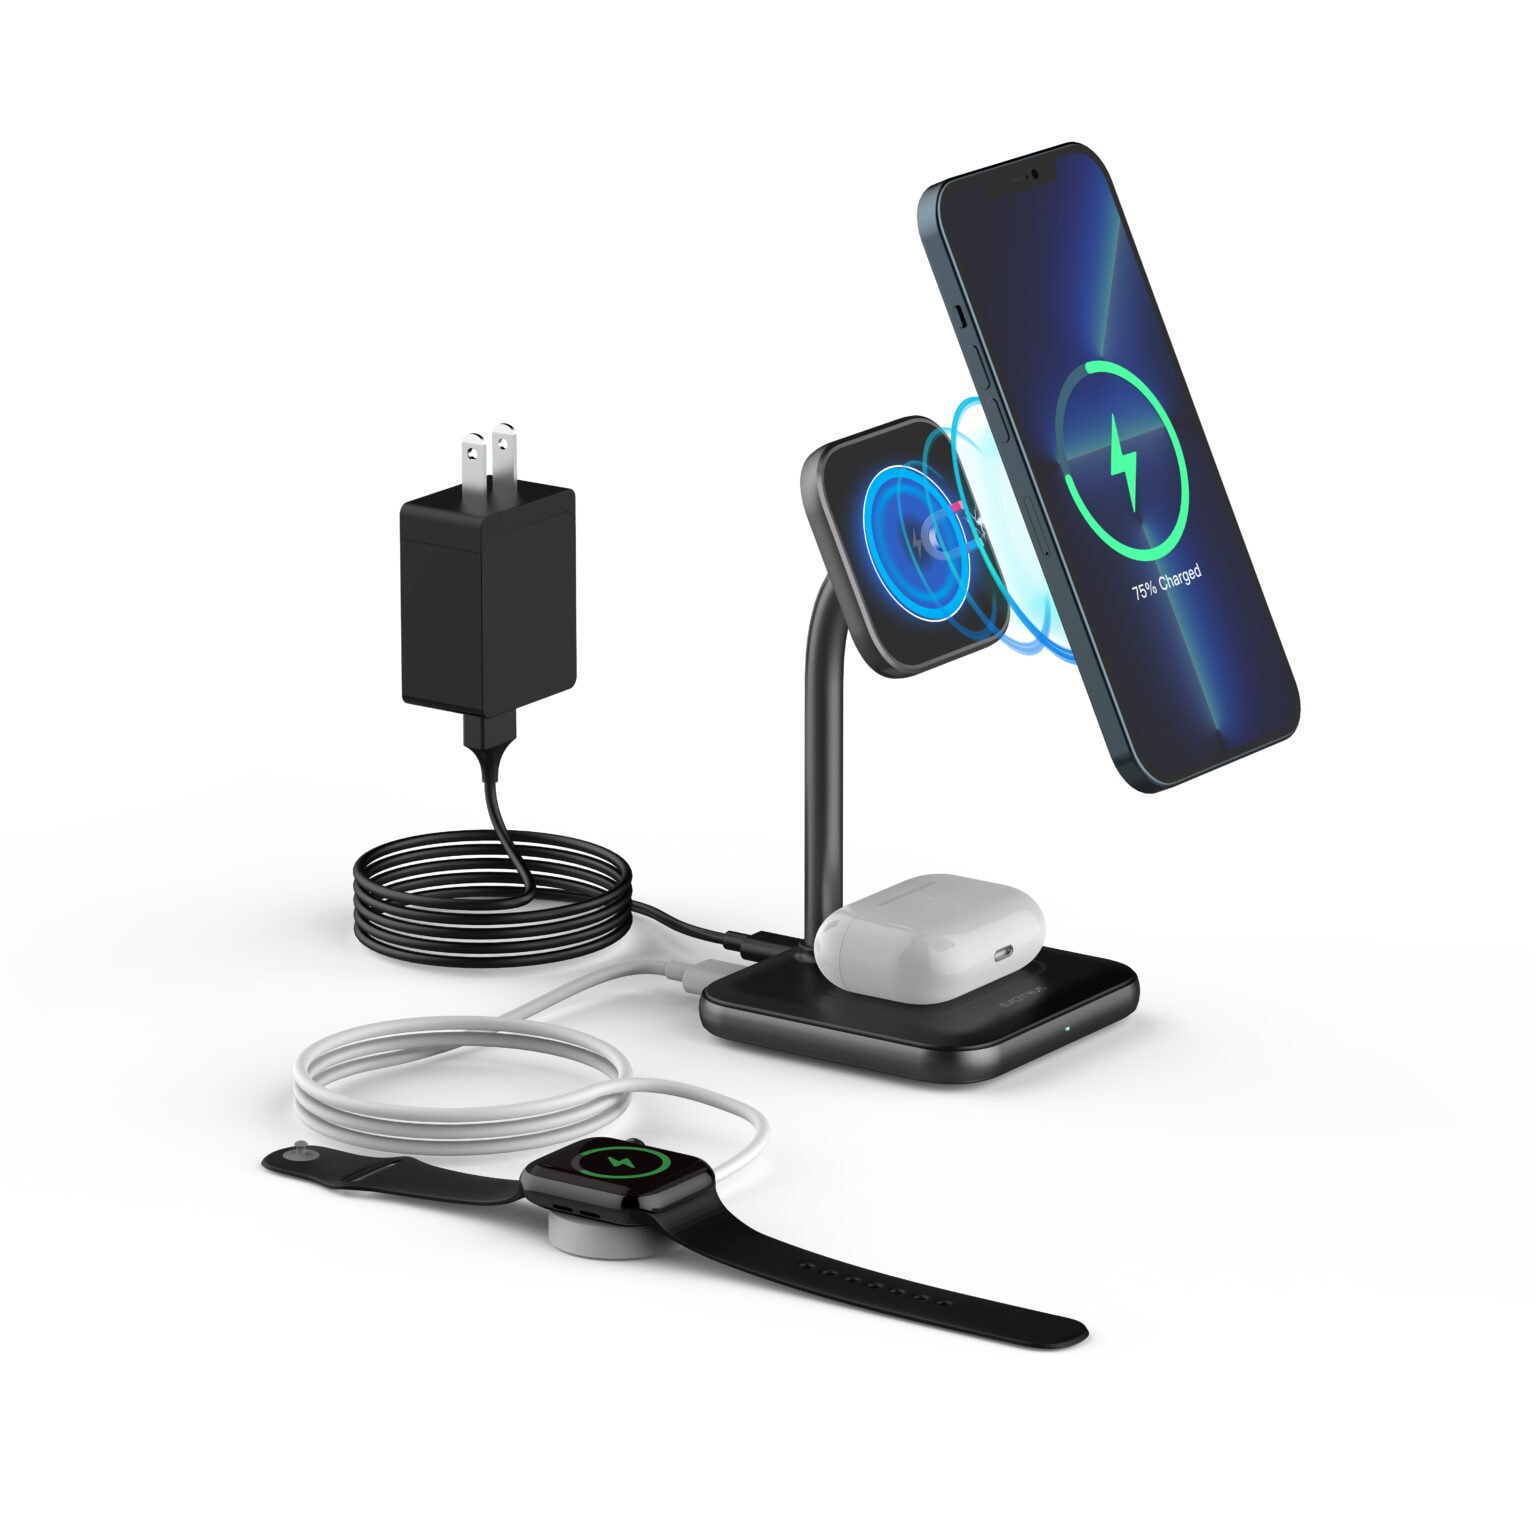 The new 3-in-1 magnetic wireless charger from Excitrus is affordable, and you can get another 20% off with a launch code.